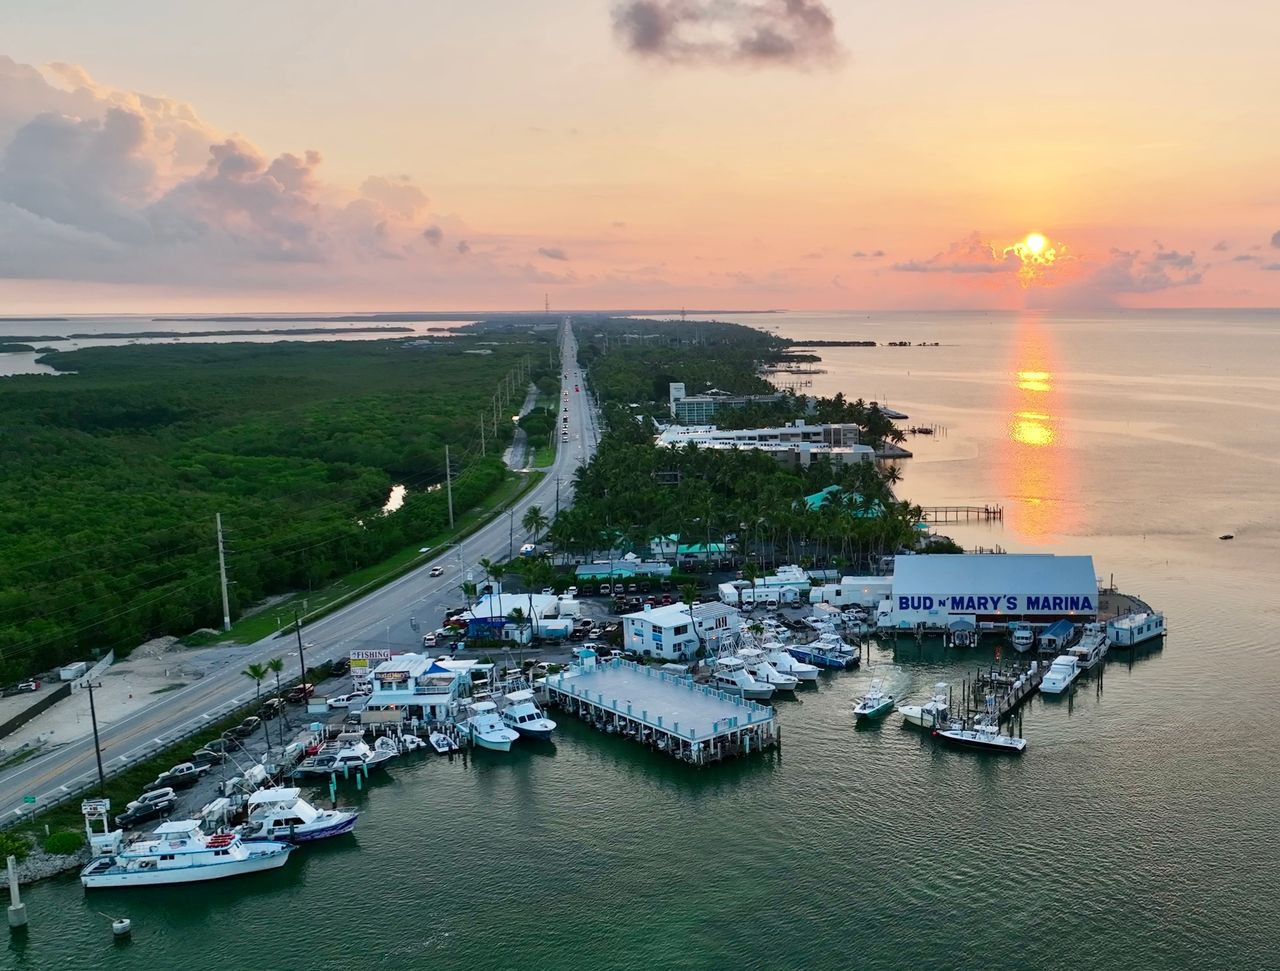 The Sea to Table Dinner is to take place at Bud N’ Mary’s Marina at 79851 Overseas Highway in Islamorada with a rooftop sunset reception and dinner in the property’s Boat Barn. 